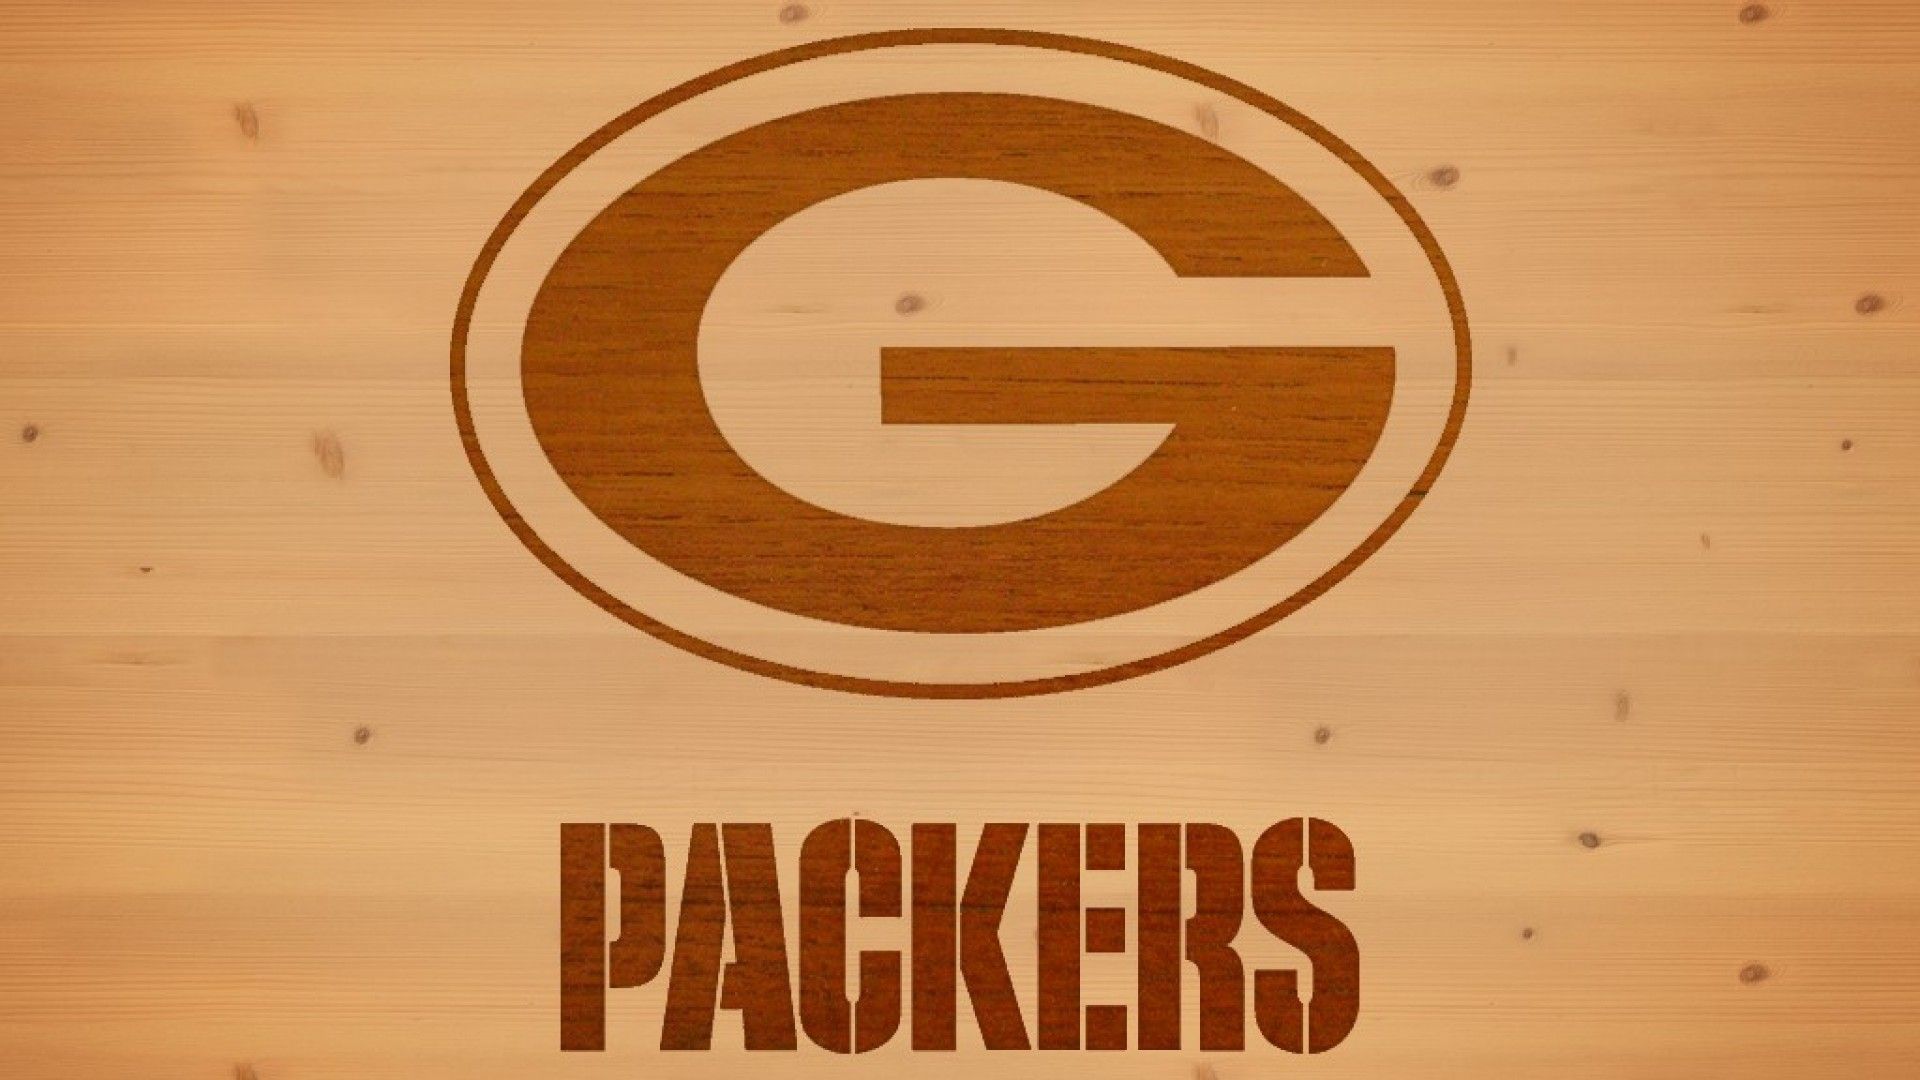 Green Bay Packers Full HD Background / 1920x1080